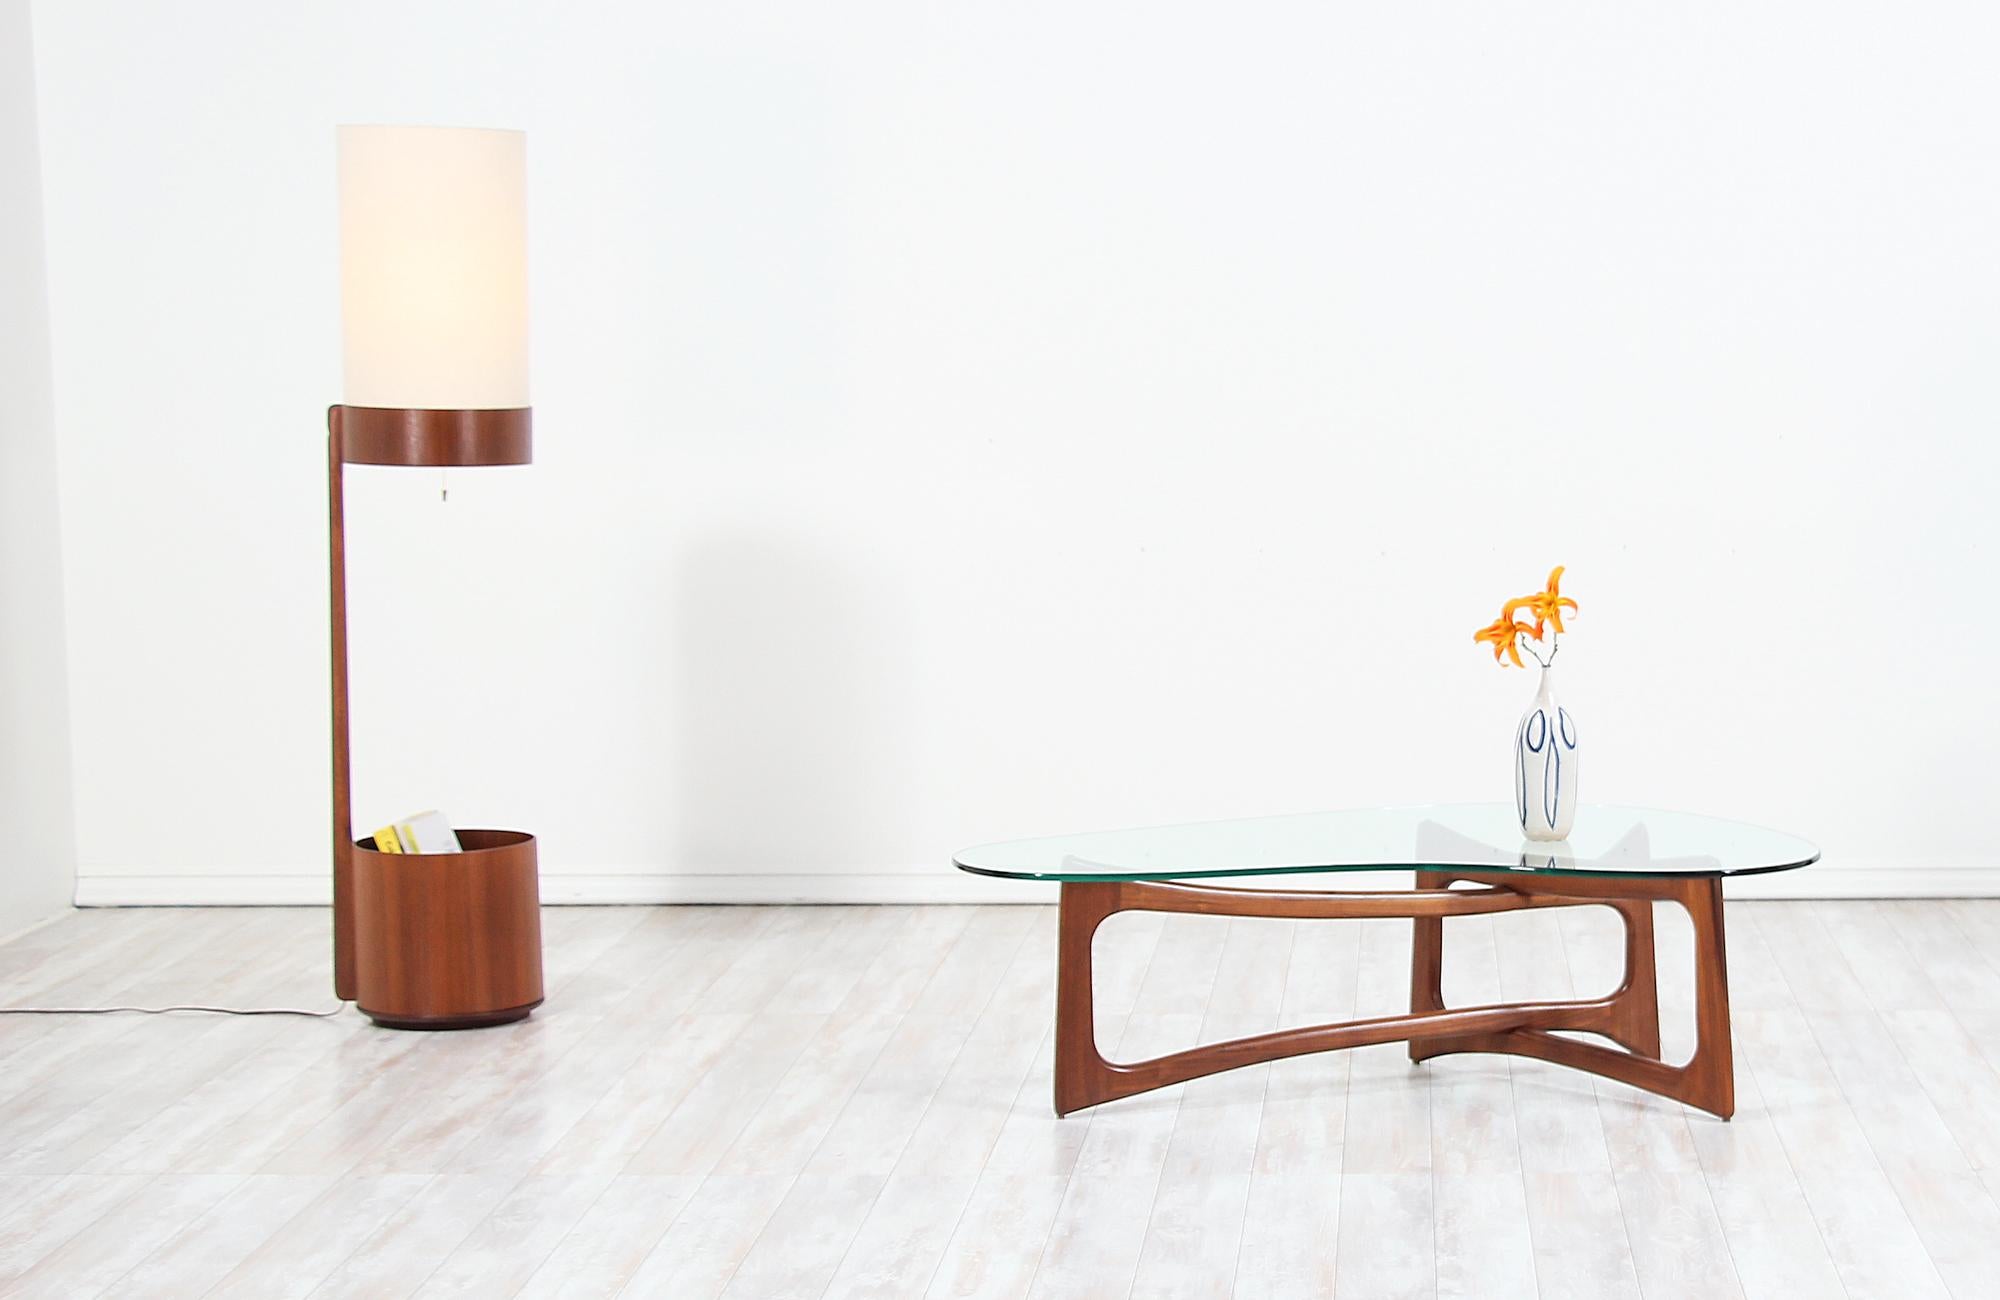 Elegant Mid-Century Modern 2450-TK coffee table designed by Adrian Pearsall for Craft Associates in the United States, circa 1960s. This coffee table features a new custom made kidney-shaped glass and a sculptural walnut wood base with a vibrant